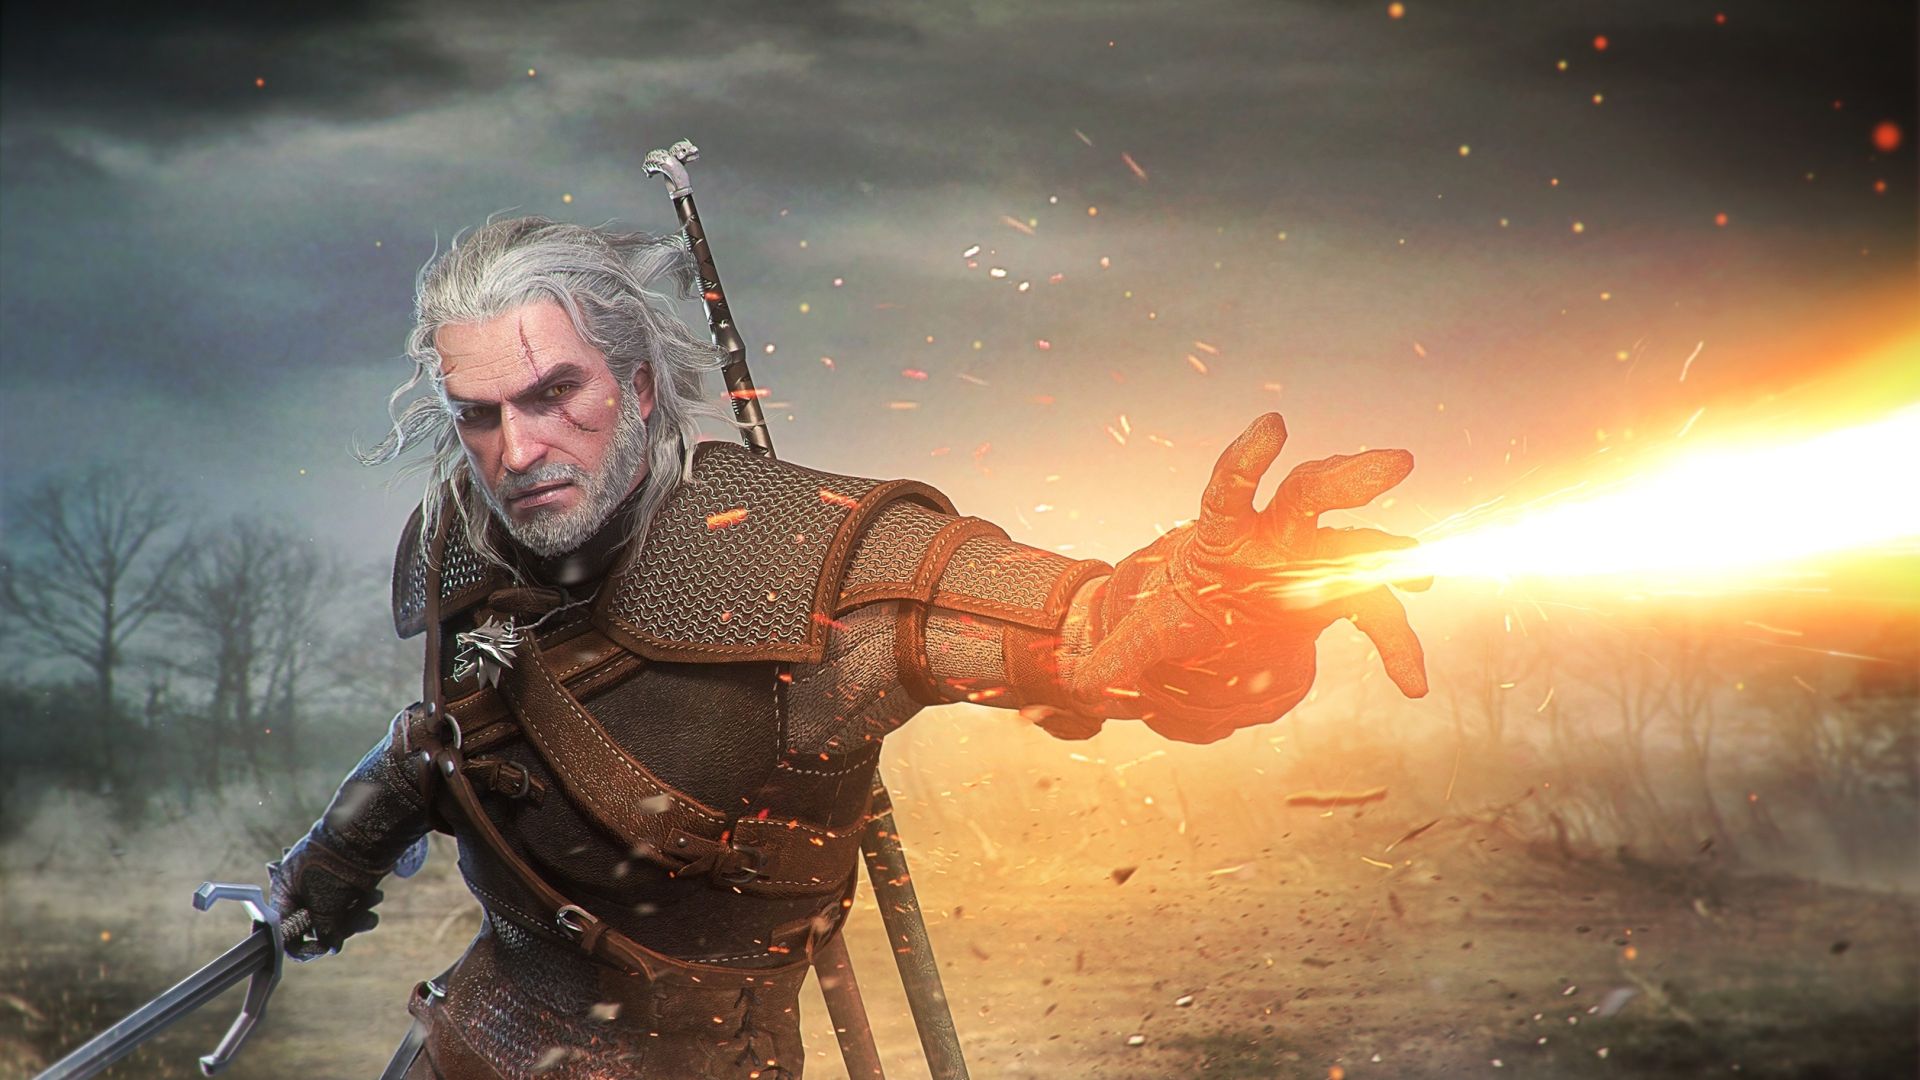 Witcher, PC Wallpaper HD